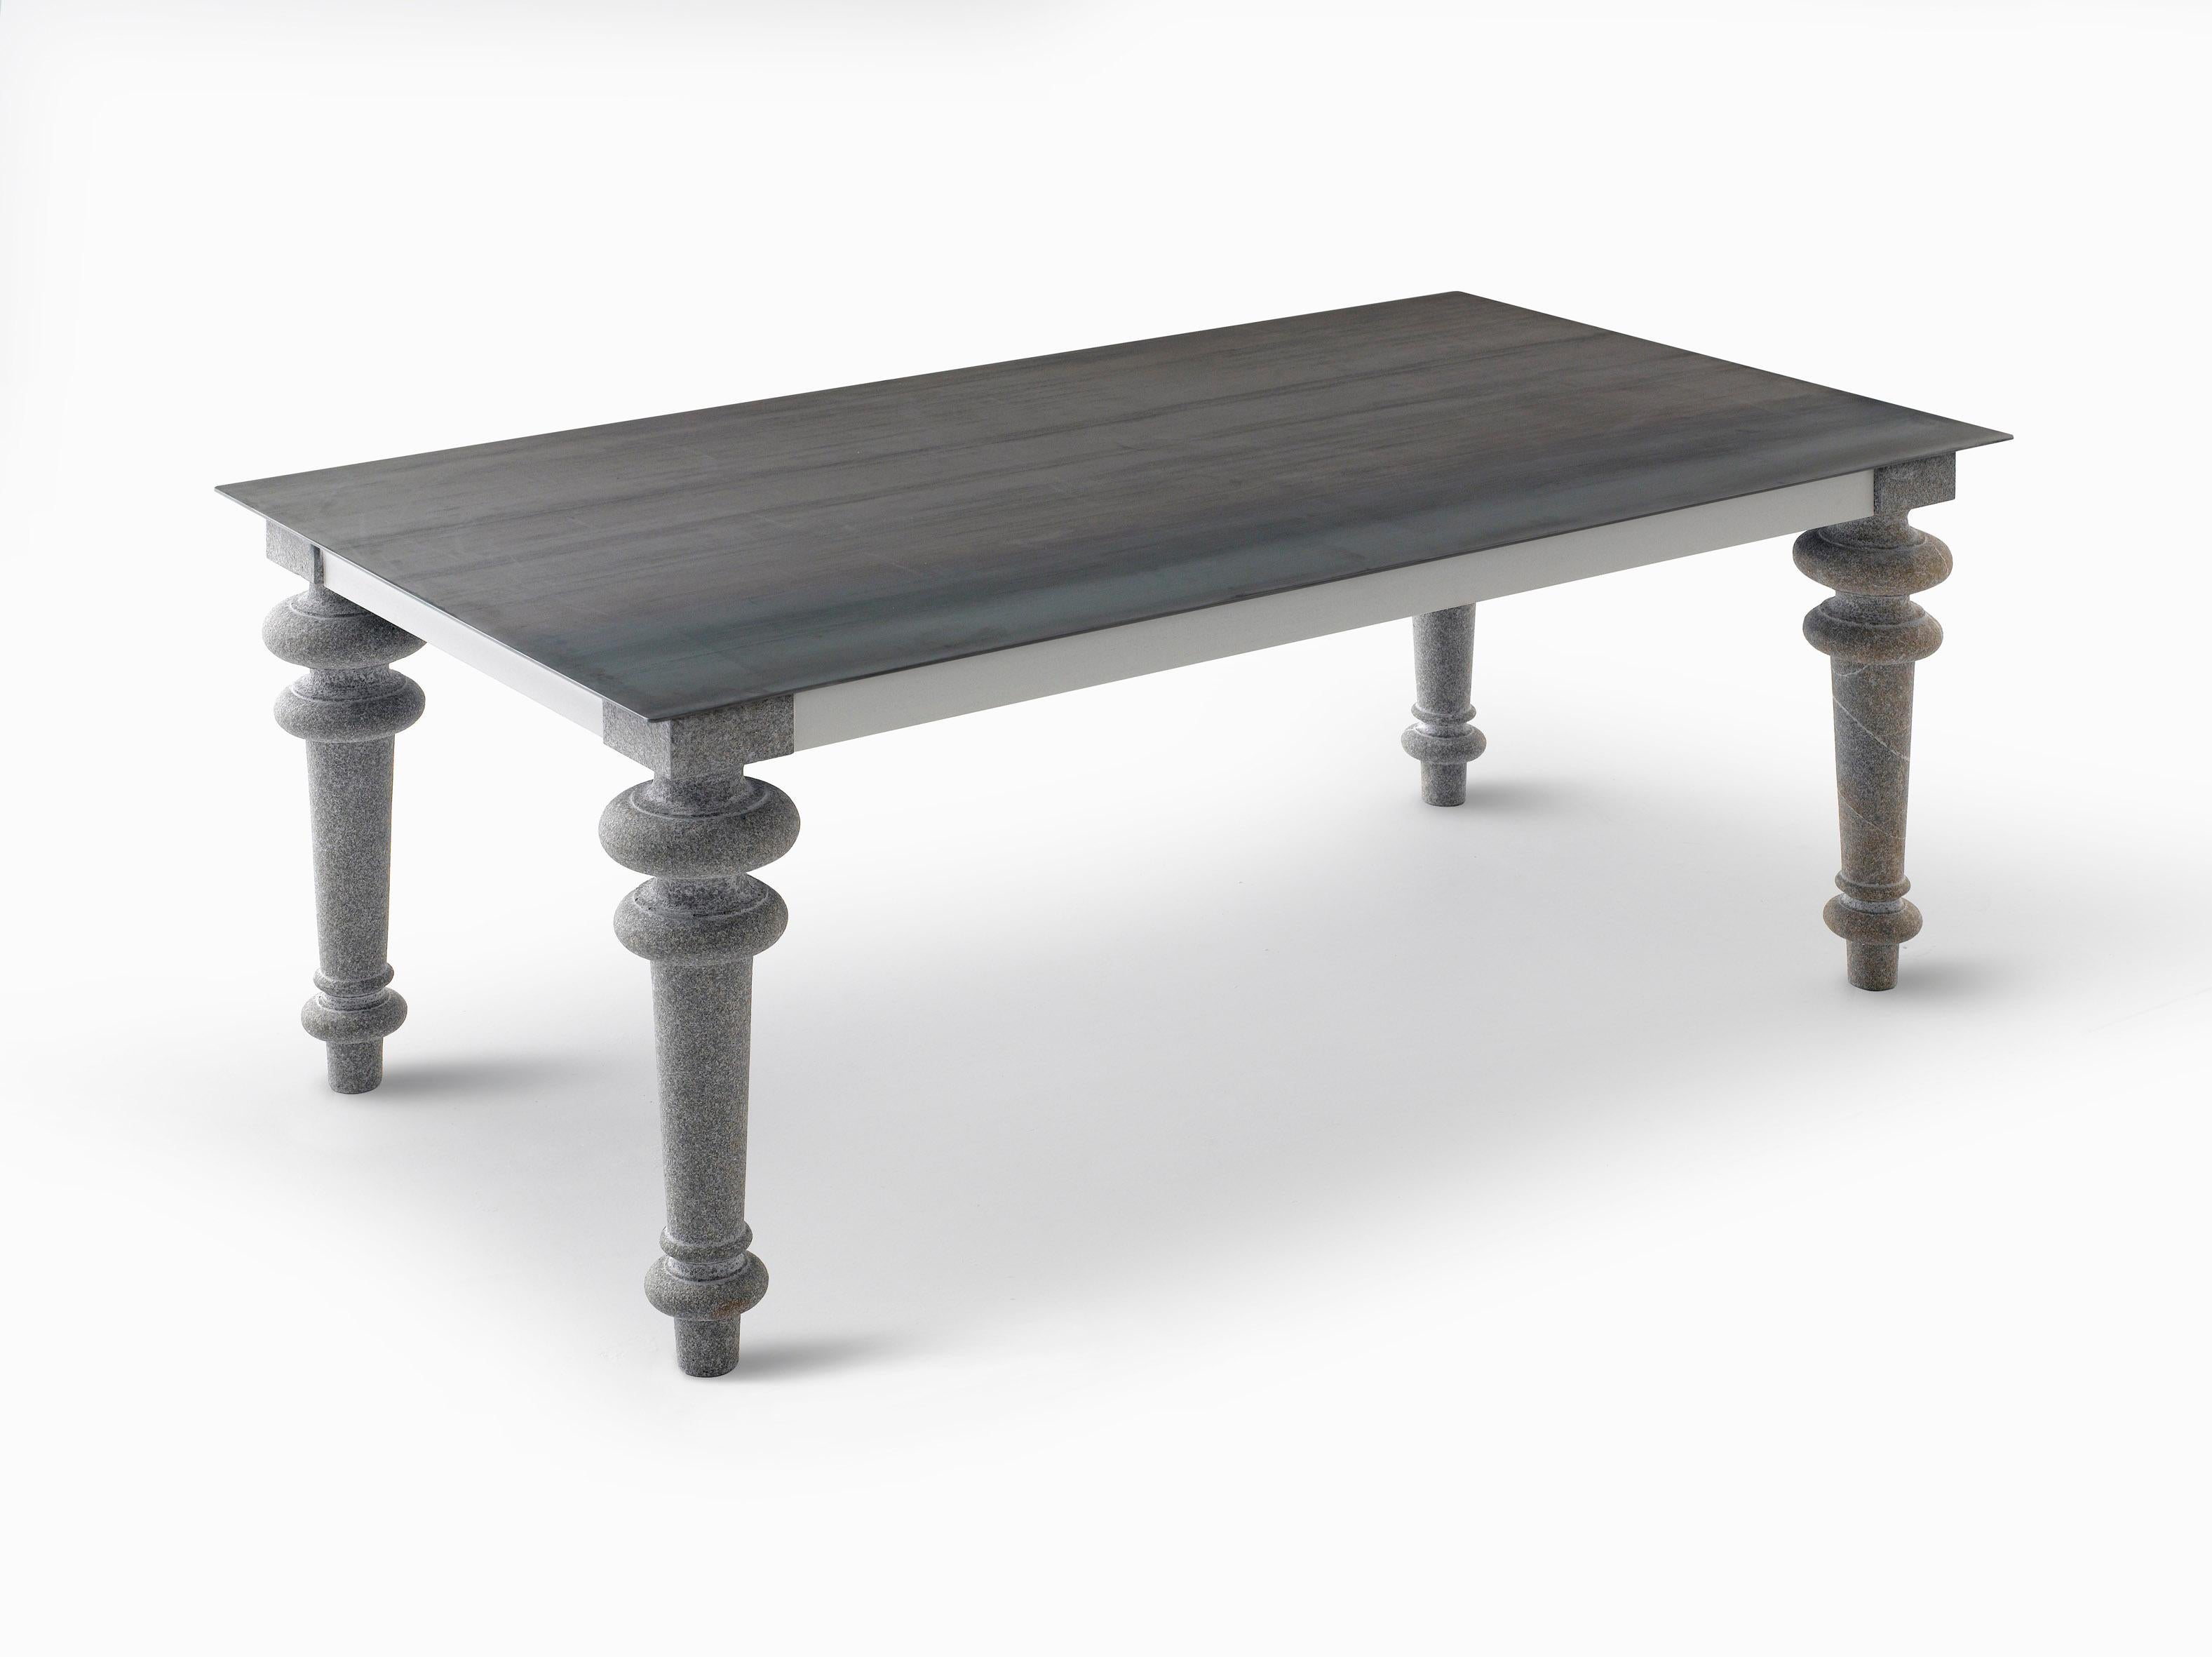 Vintage soul and contemporary design characterise the Gray 32/33/34/35 family of tables. Available in different sizes with a square or rectangular top, they feature different materials that combine to create multiple possibilities. The top with